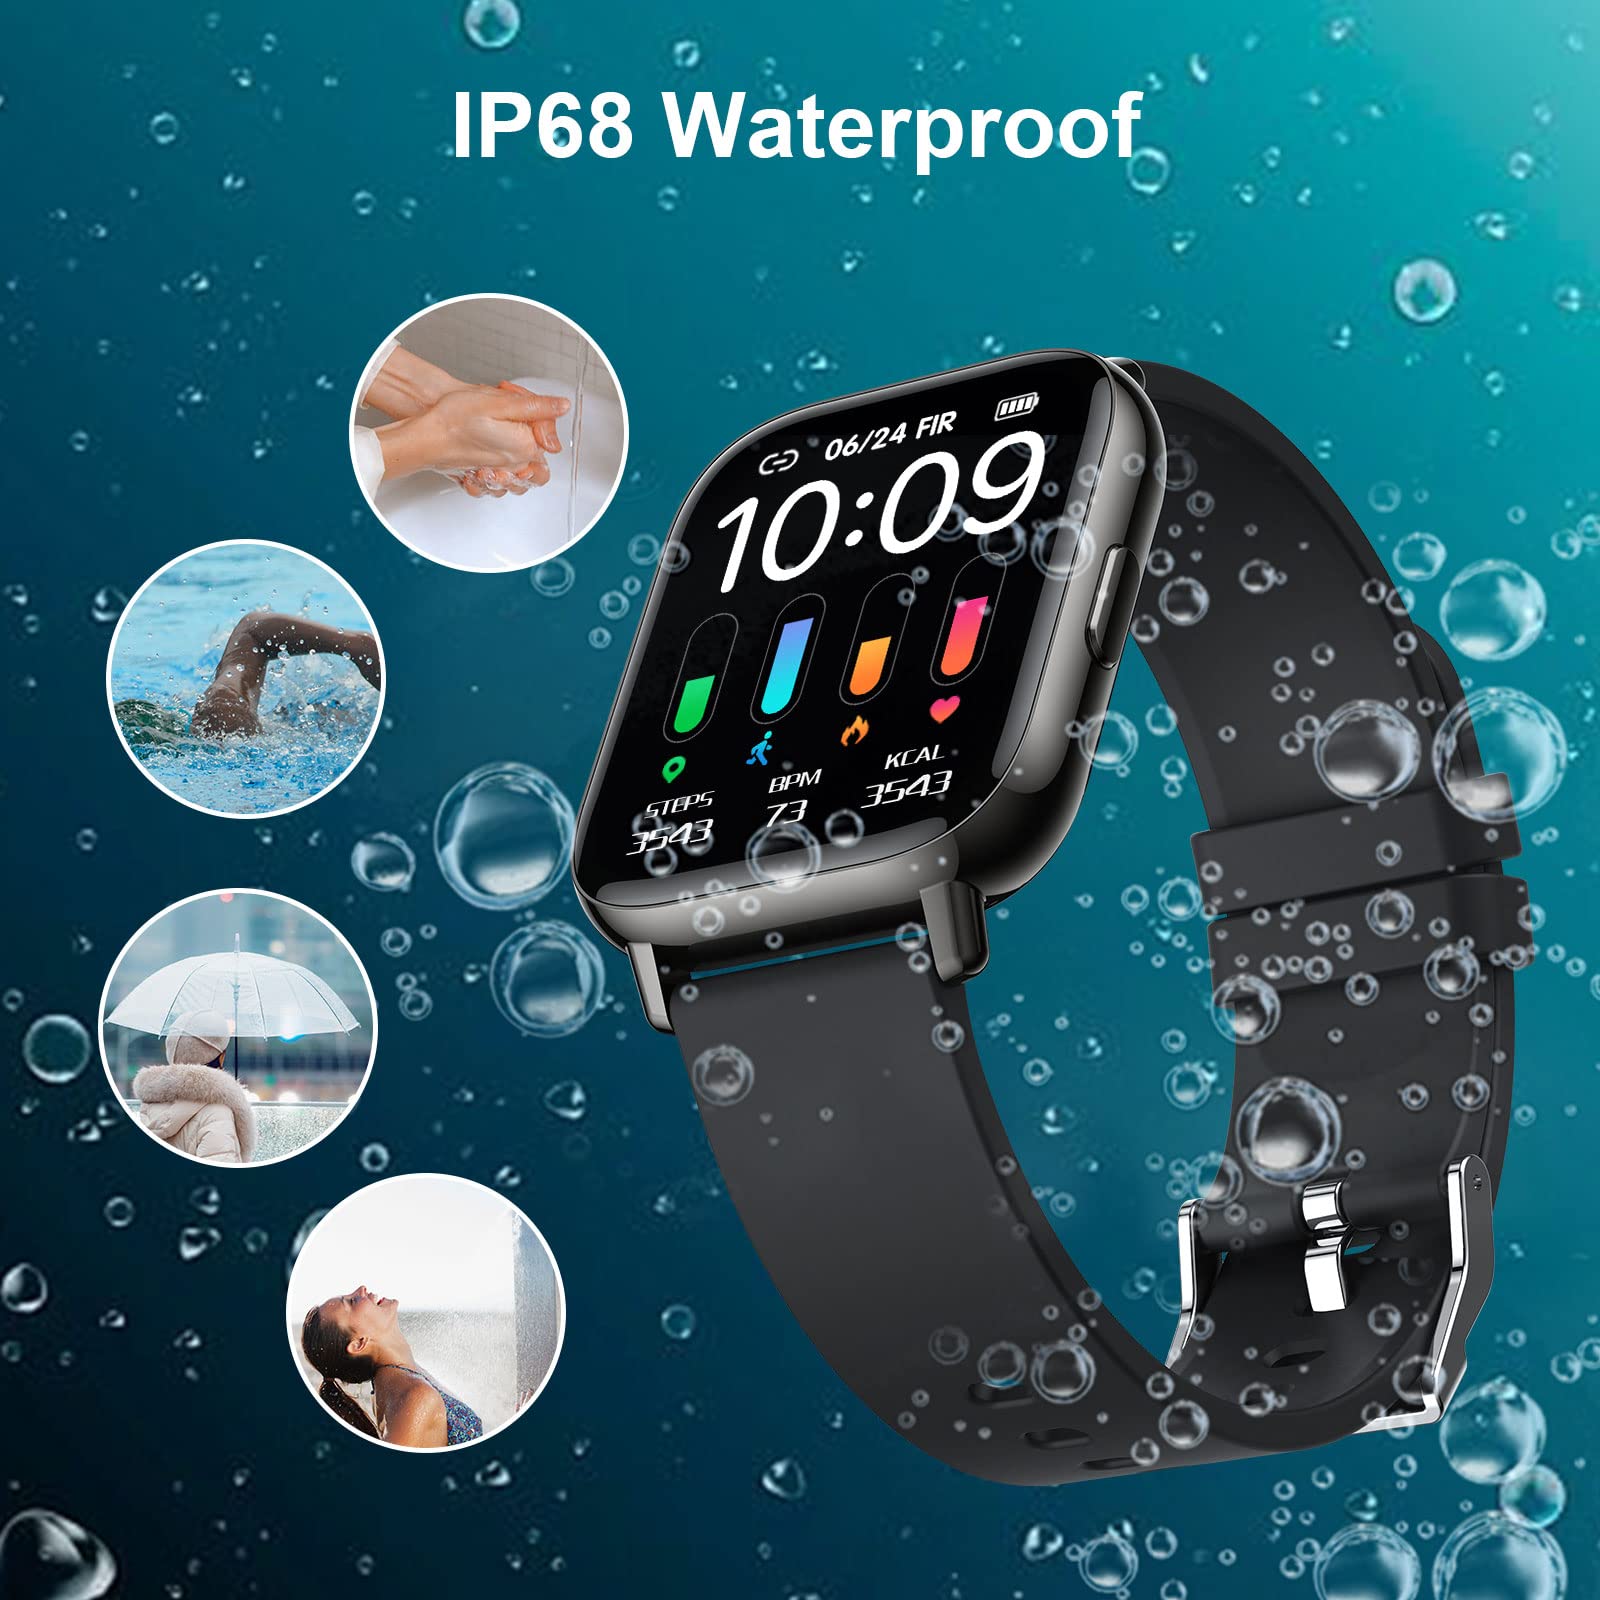 Smart Watch Men Women, 1.69" Fitness Tracker with Sleep/Heart Rate Monitor, Calorie/Step Counter Fitness Watch 24 Sports Modes, Shared GPS Smartwatch, I-PX68 Waterpoof Activity Tracker for Android iOS